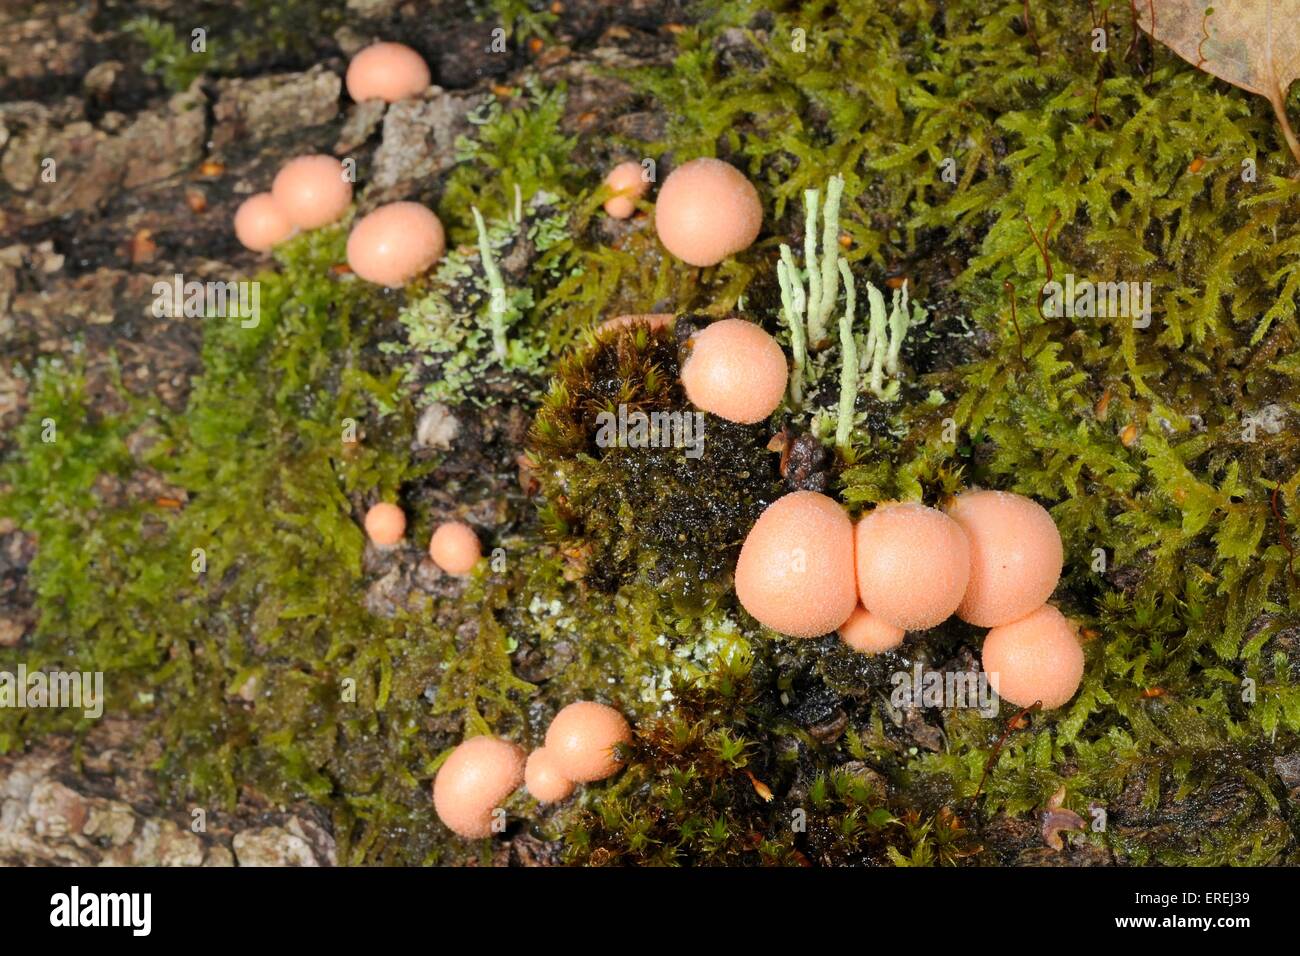 Wolf's milk slime balls (Lycogale terrestre), alongside a clump of Pixie cup lichen (Cladonia fimbriata) on a mossy log. Stock Photo